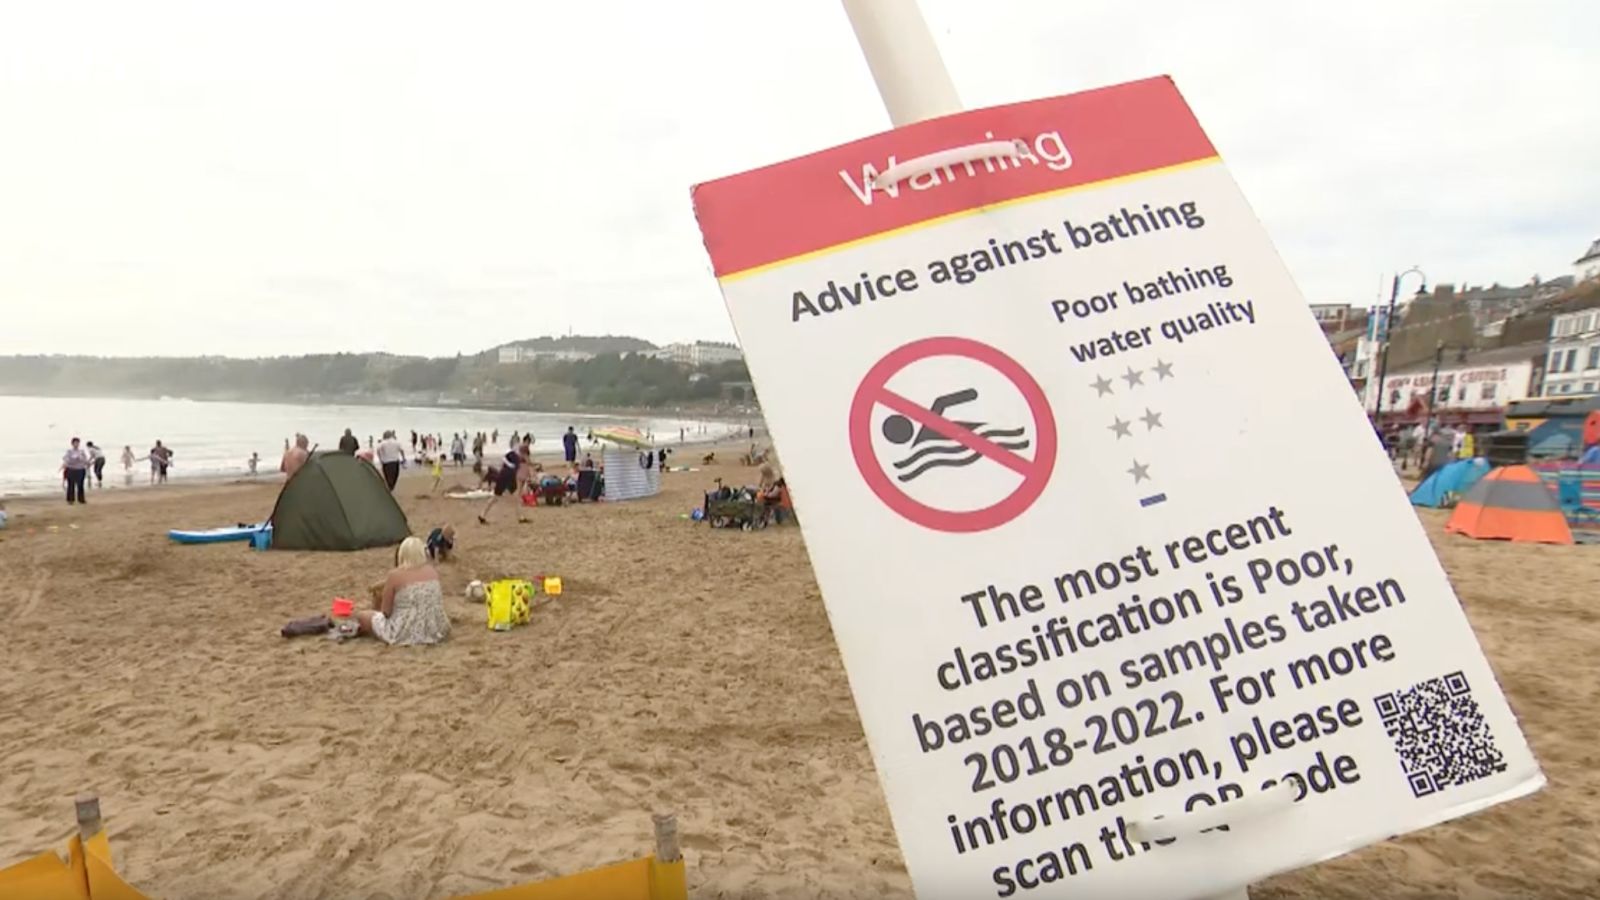 Beaches Are Failing Water Quality Tests, But They're Still Open